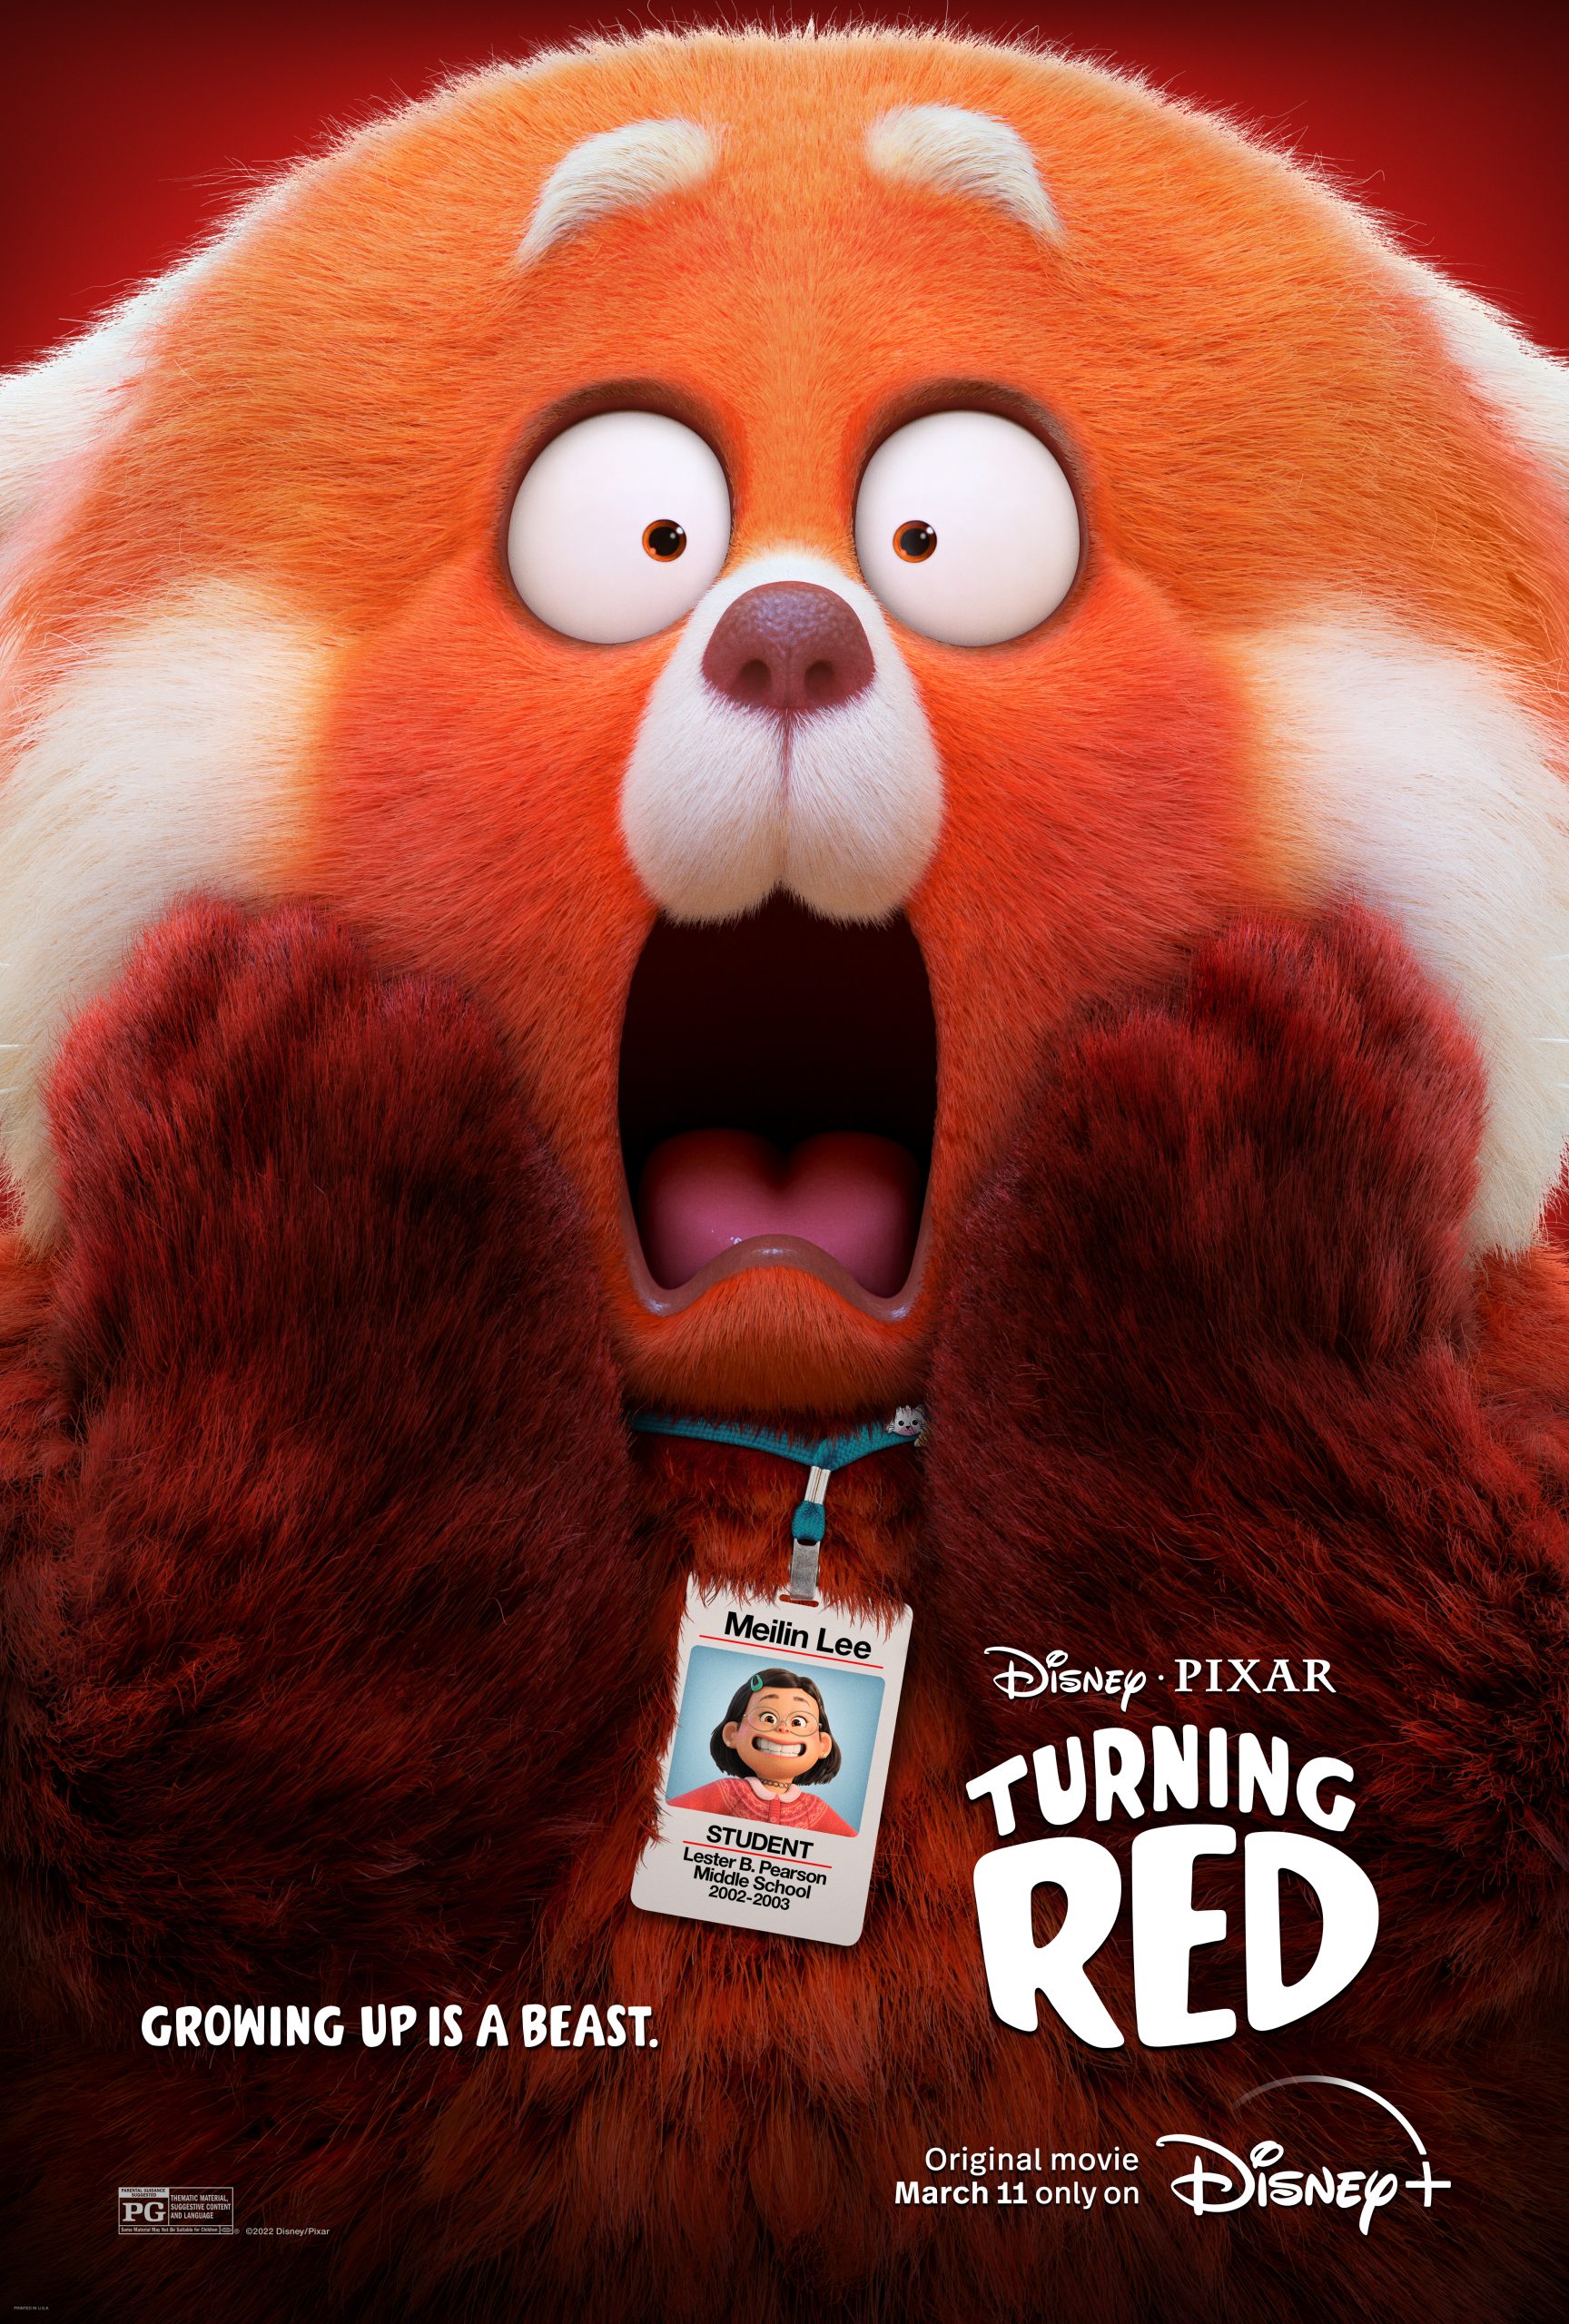 The Cast of Pixar's 'Turning Red' Speak to the Characters and Inspiration of the Film